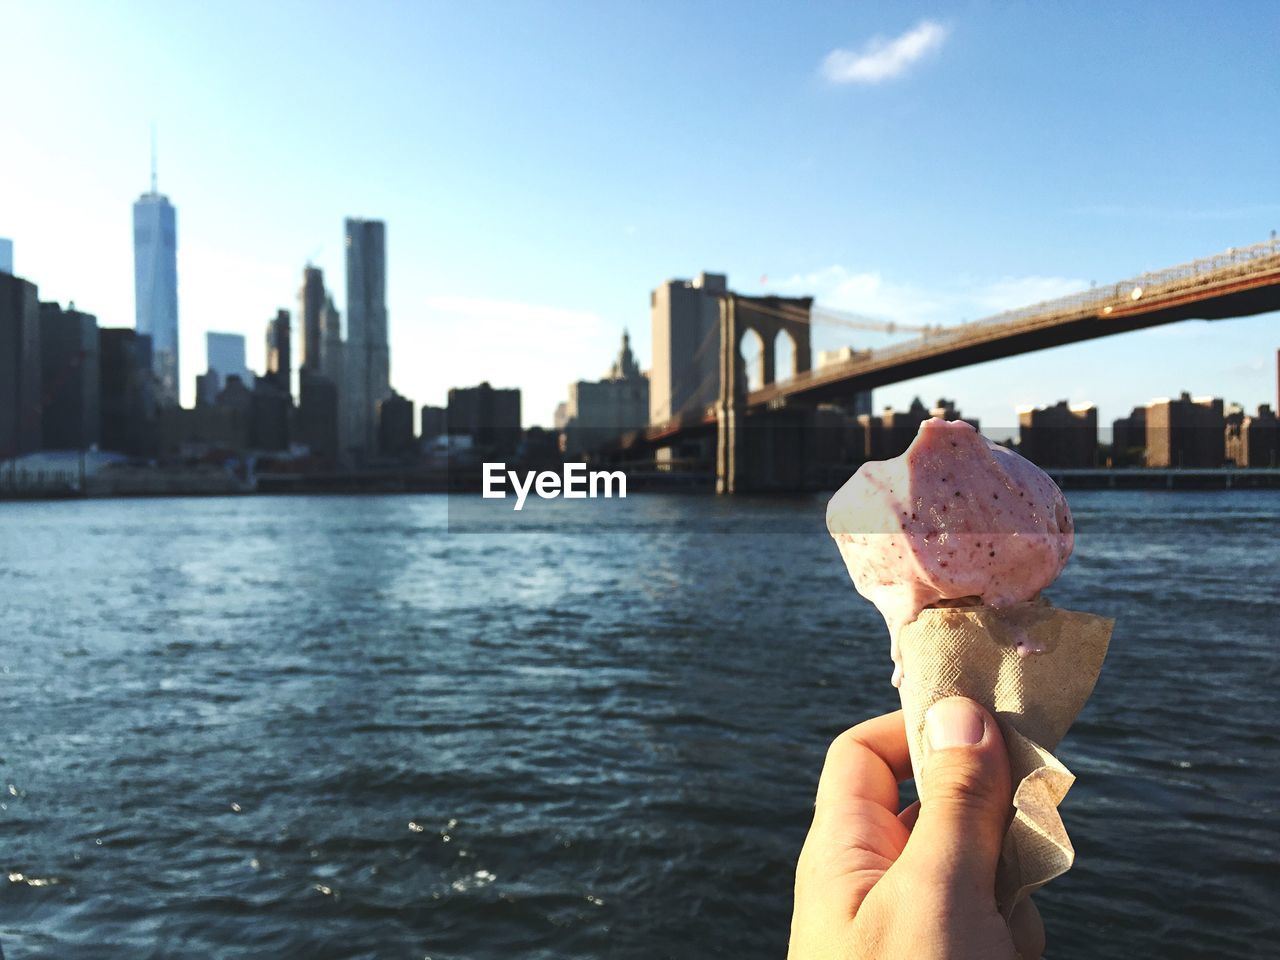 Cropped image of hand holding ice cream against brooklyn bridge